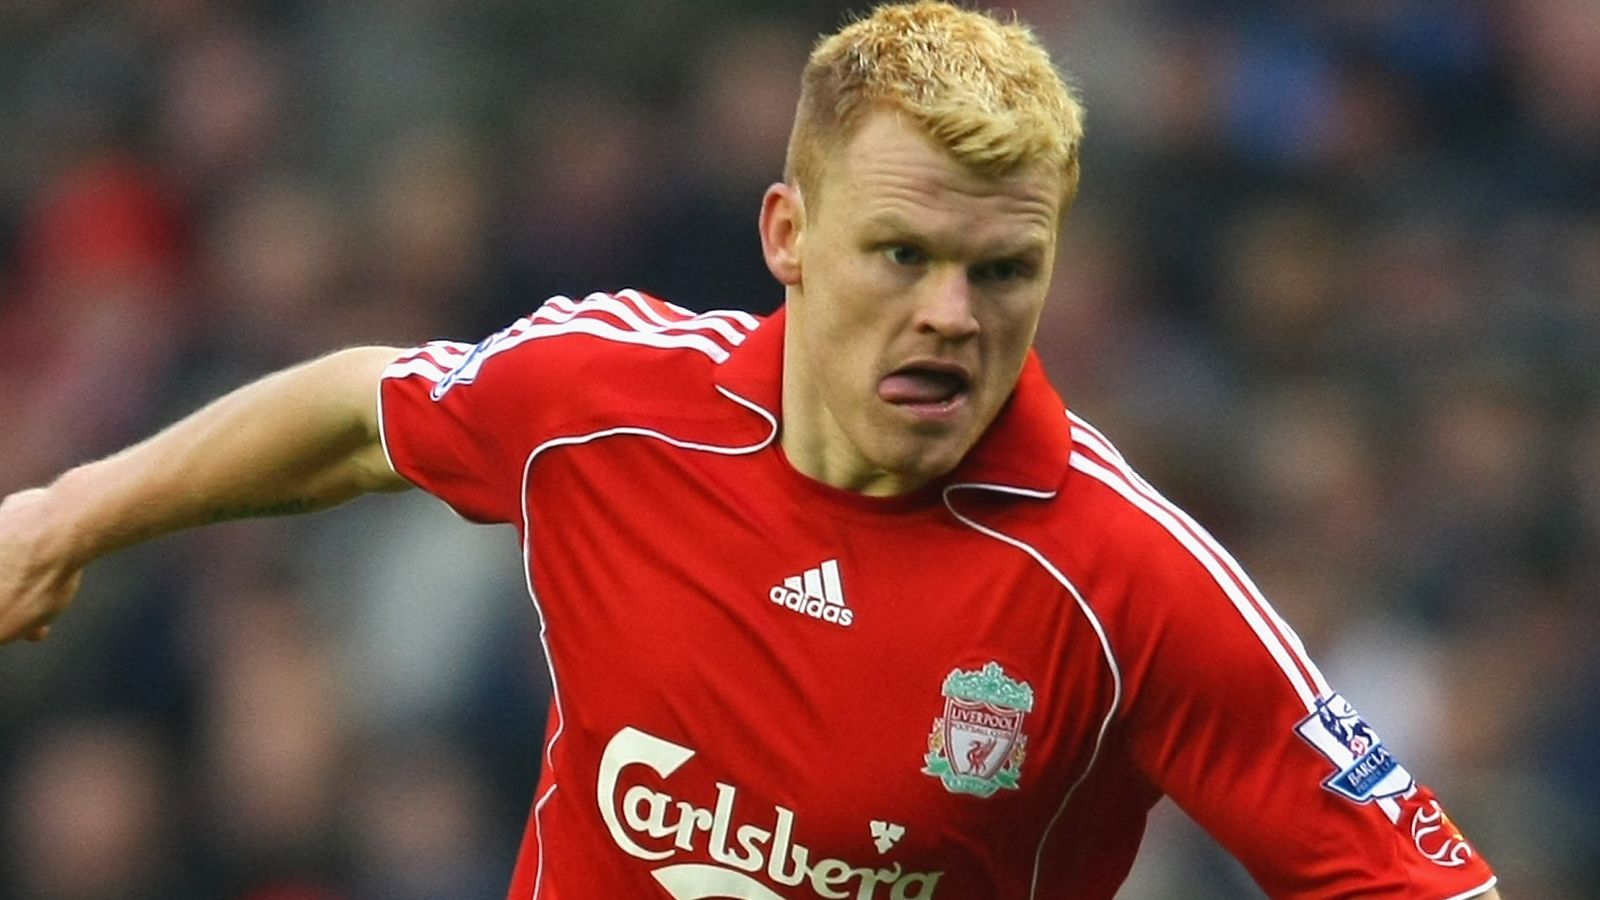 John Arne Riise: Ex-Liverpool player released from hospital after car accident | Football News | Sky Sports